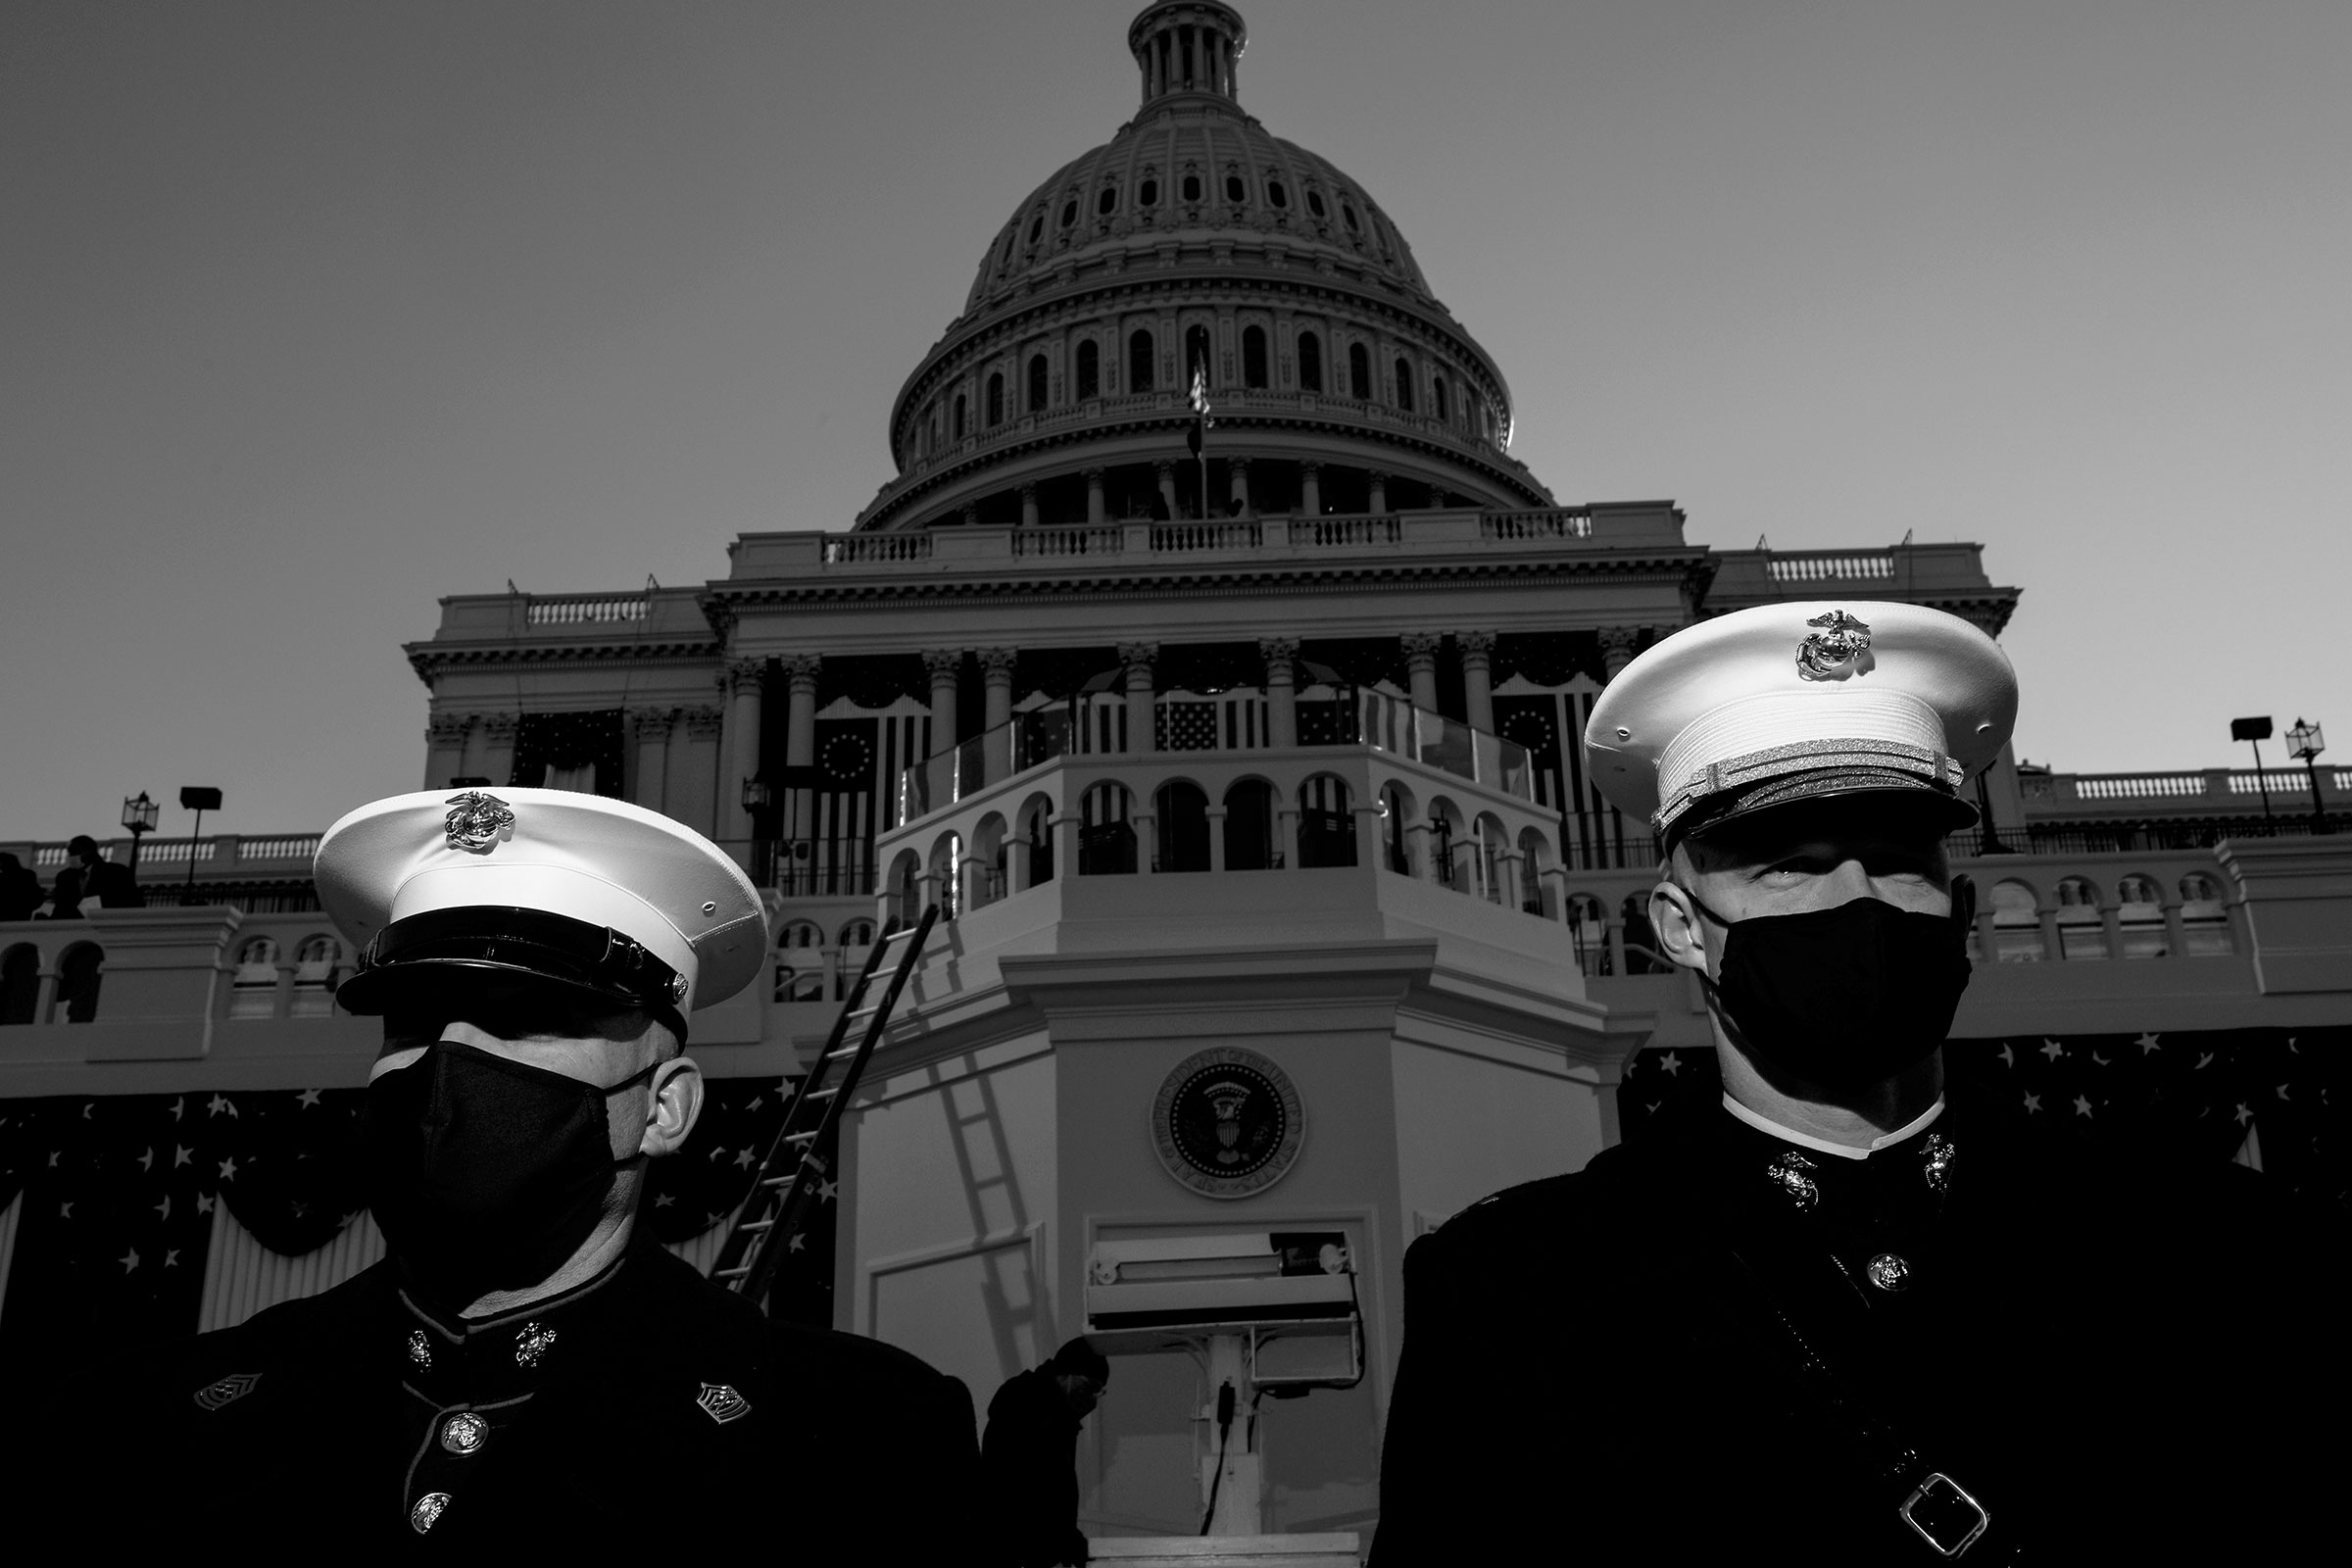 Service members stand guard at the Capitol ahead of the <a href="https://time.com/5930876/joe-biden-inauguration-photos/">inauguration</a> of President-elect Joe Biden and Vice President-elect Kamala Harris on Jan. 20. (Philip Montgomery for TIME)